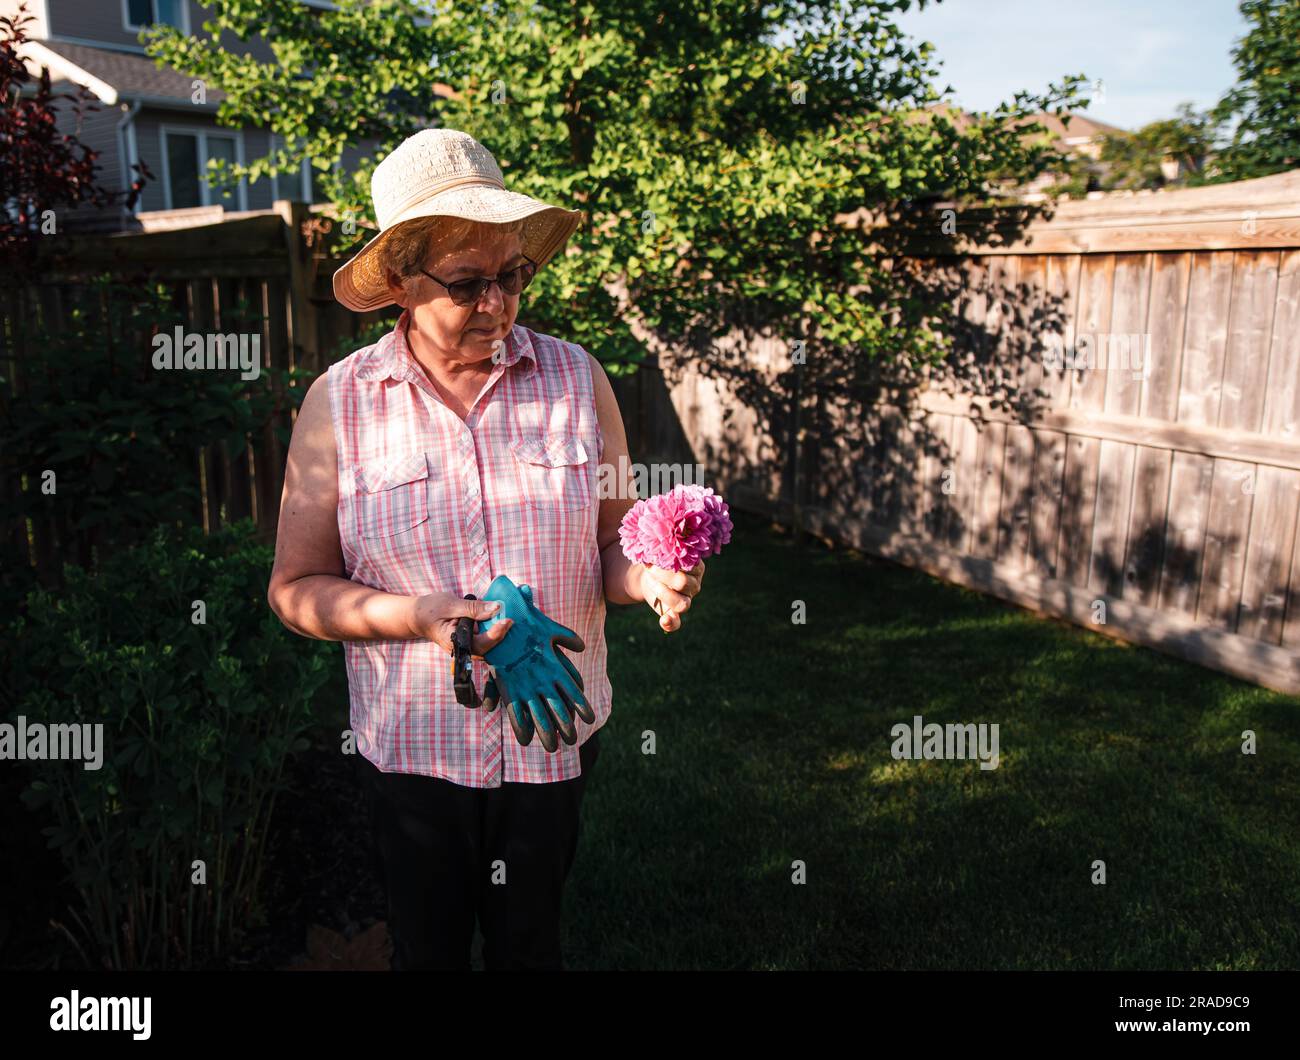 Older woman in hat looking at bunch of freshly cut flowers in a yard. Stock Photo